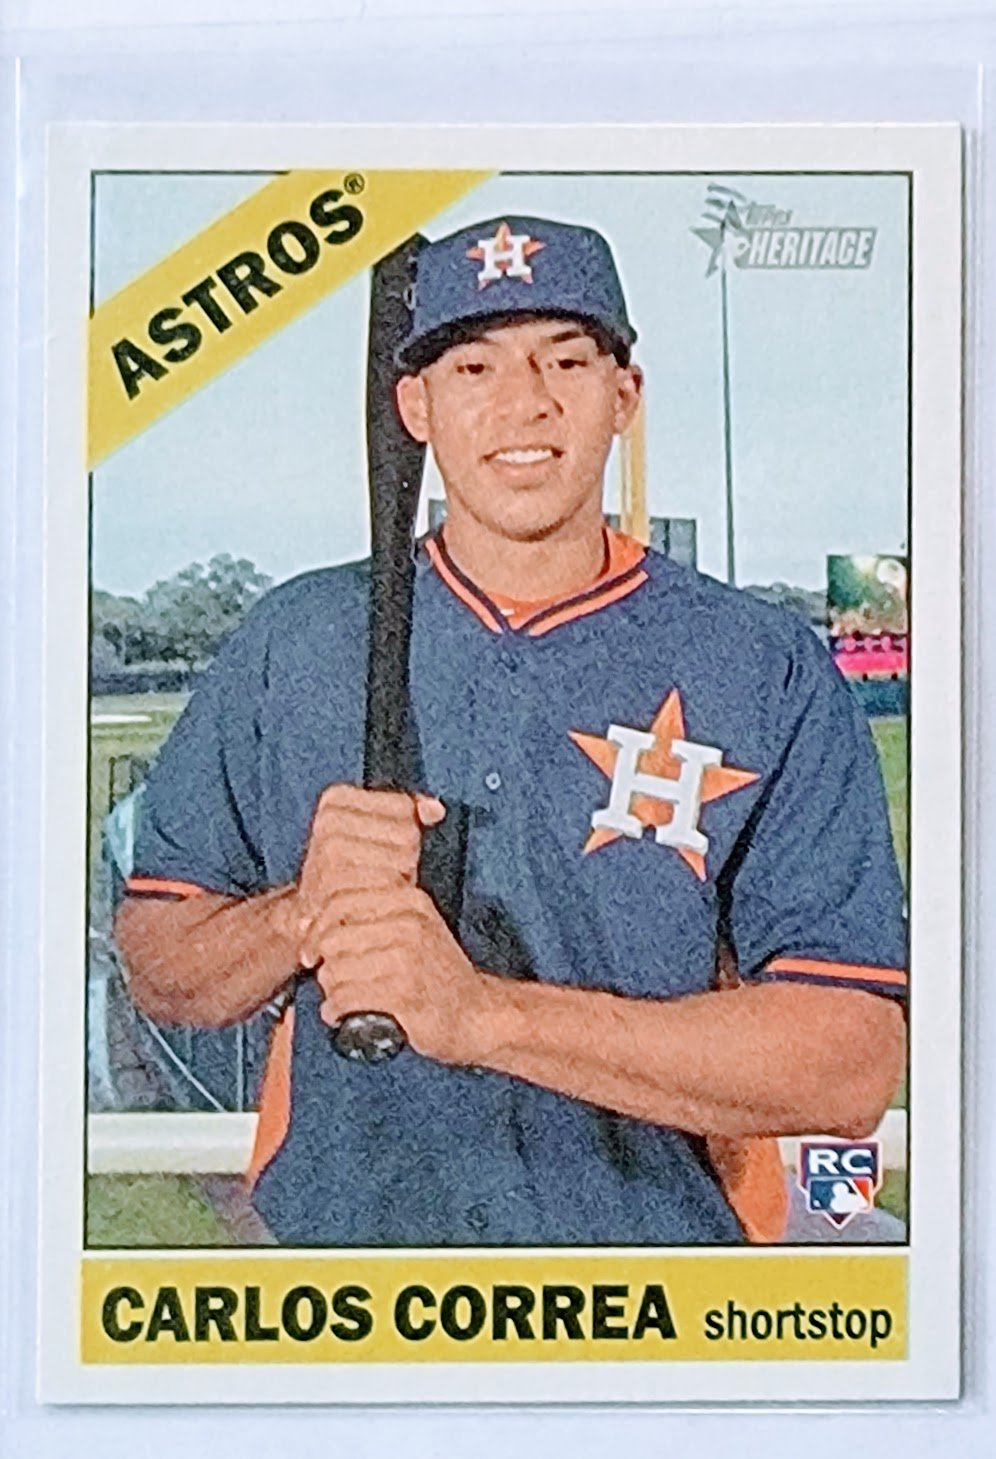 2015 Topps Heritage Carlos Correa Yellow Color Swap Rookie Baseball Trading Card TPTV simple Xclusive Collectibles   